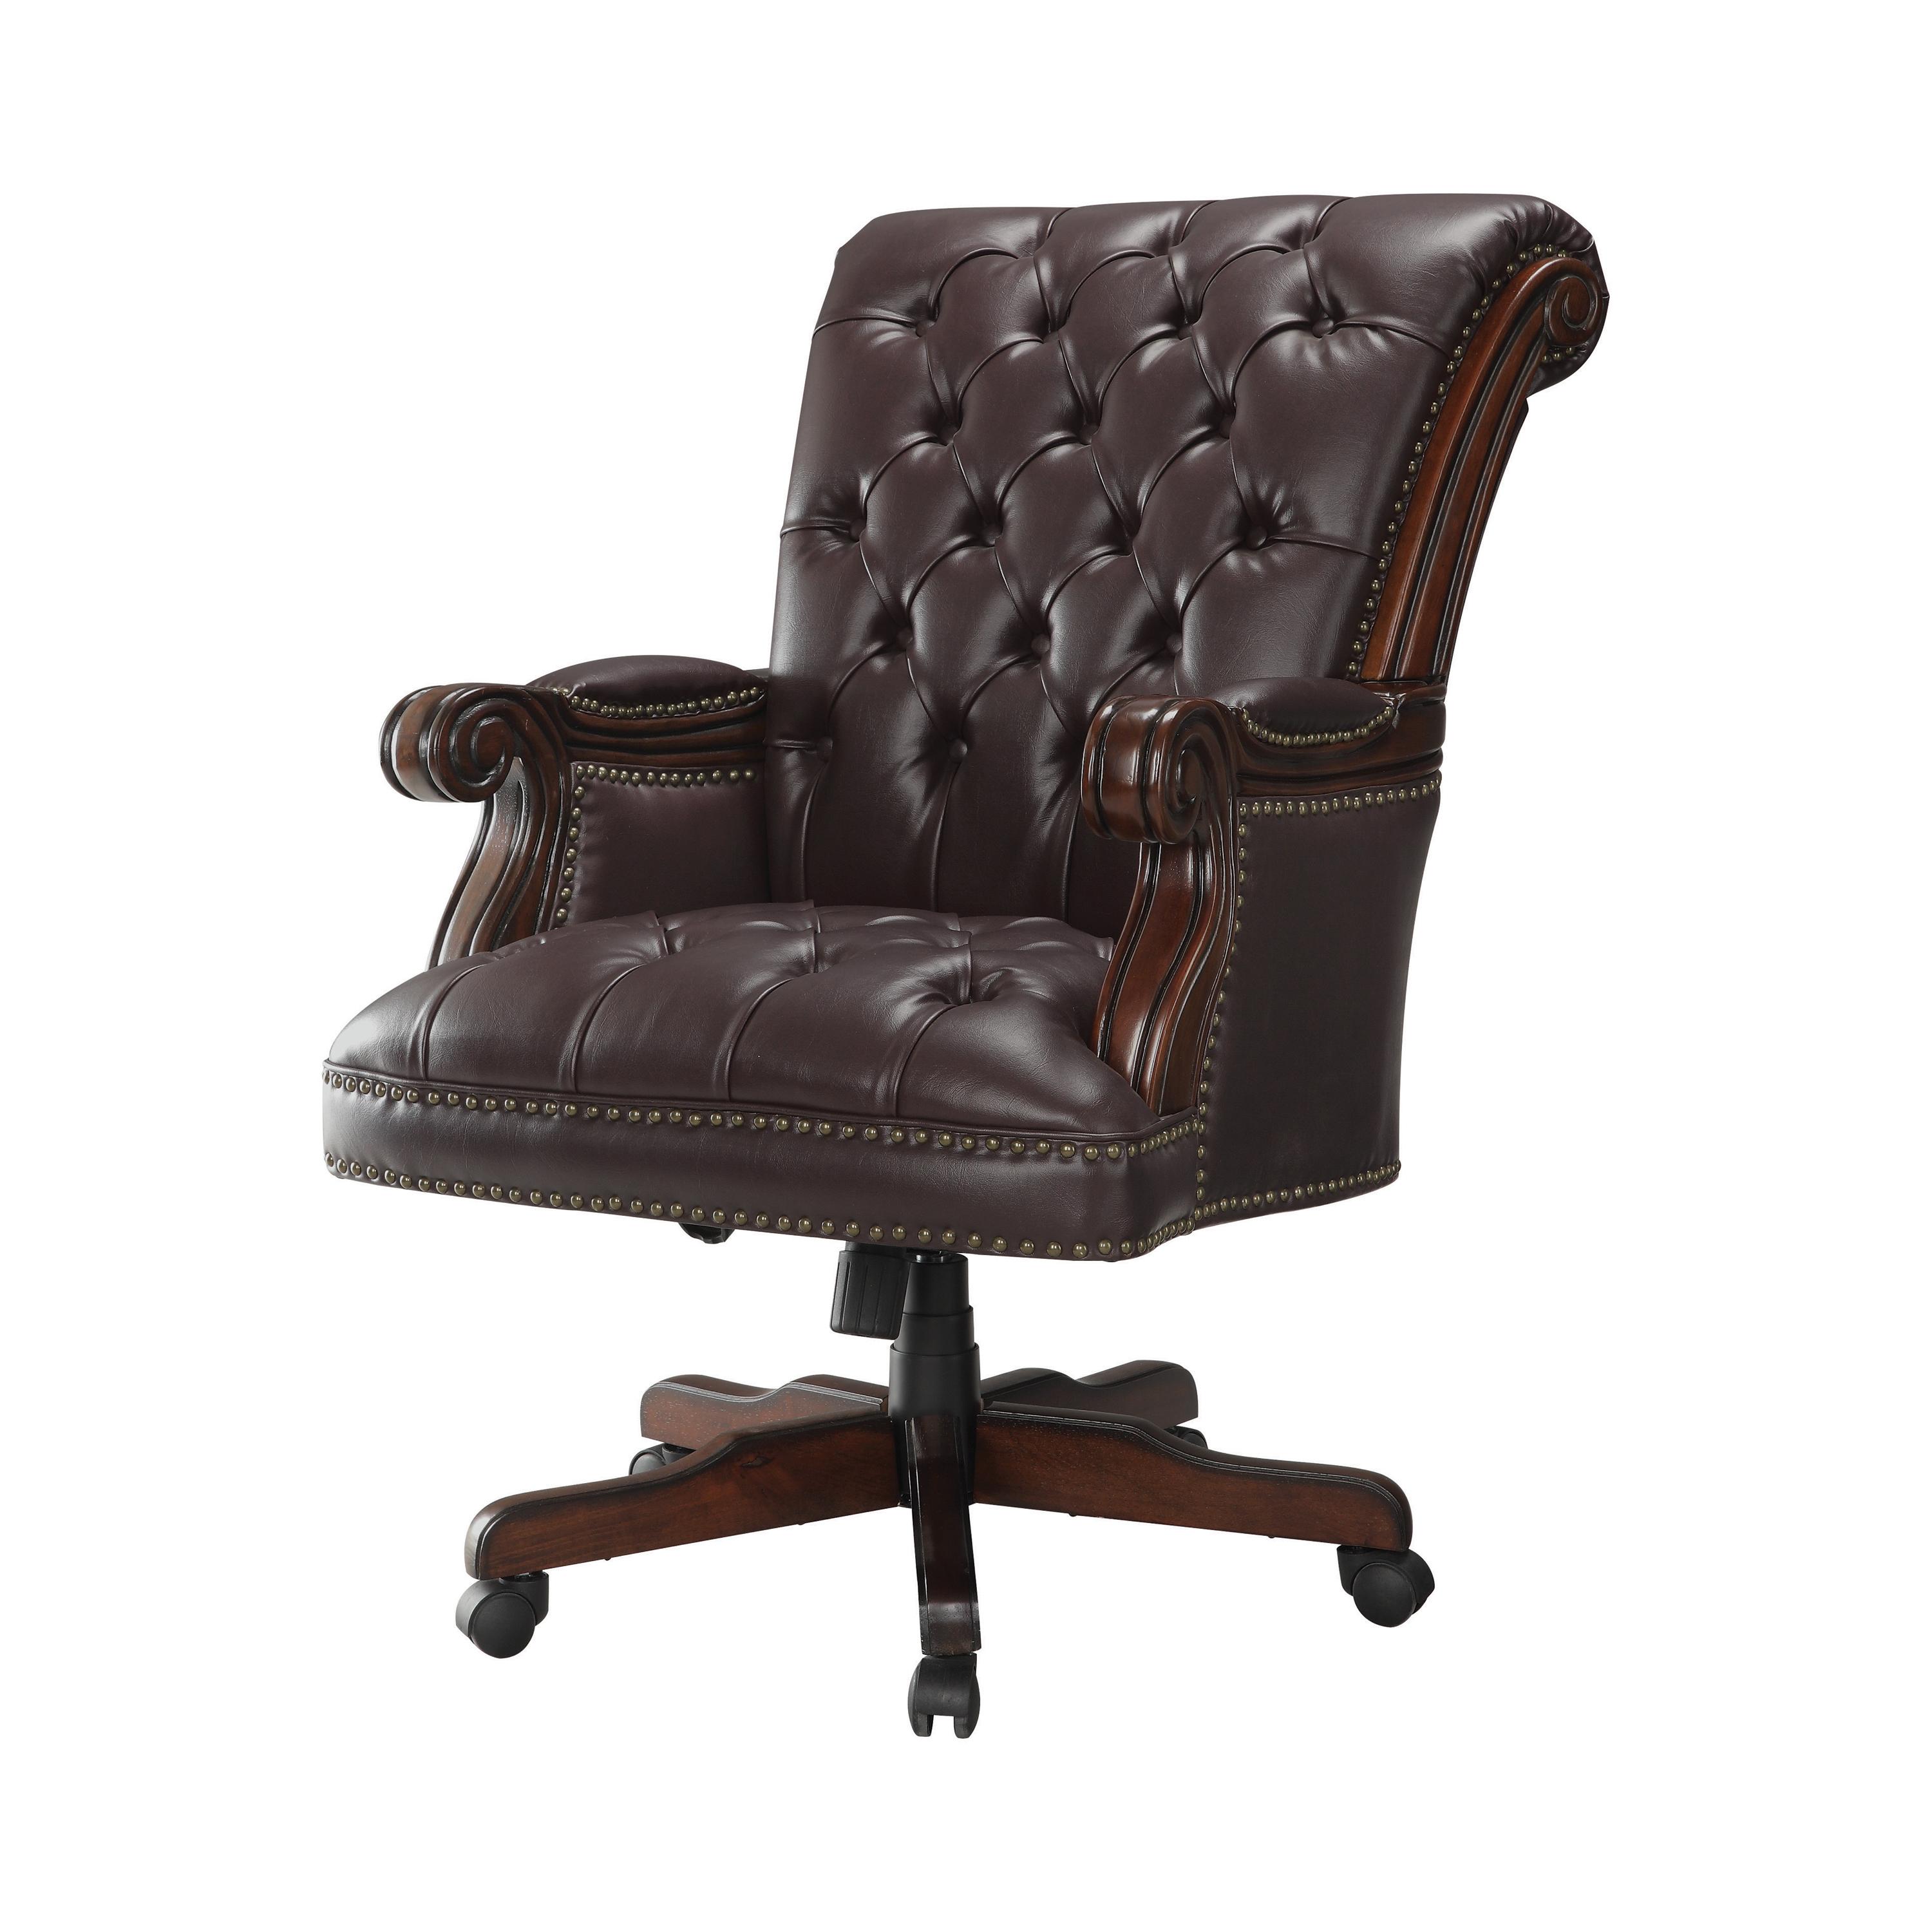 Contemporary Office Chair 800142 800142 in Dark Brown Leatherette